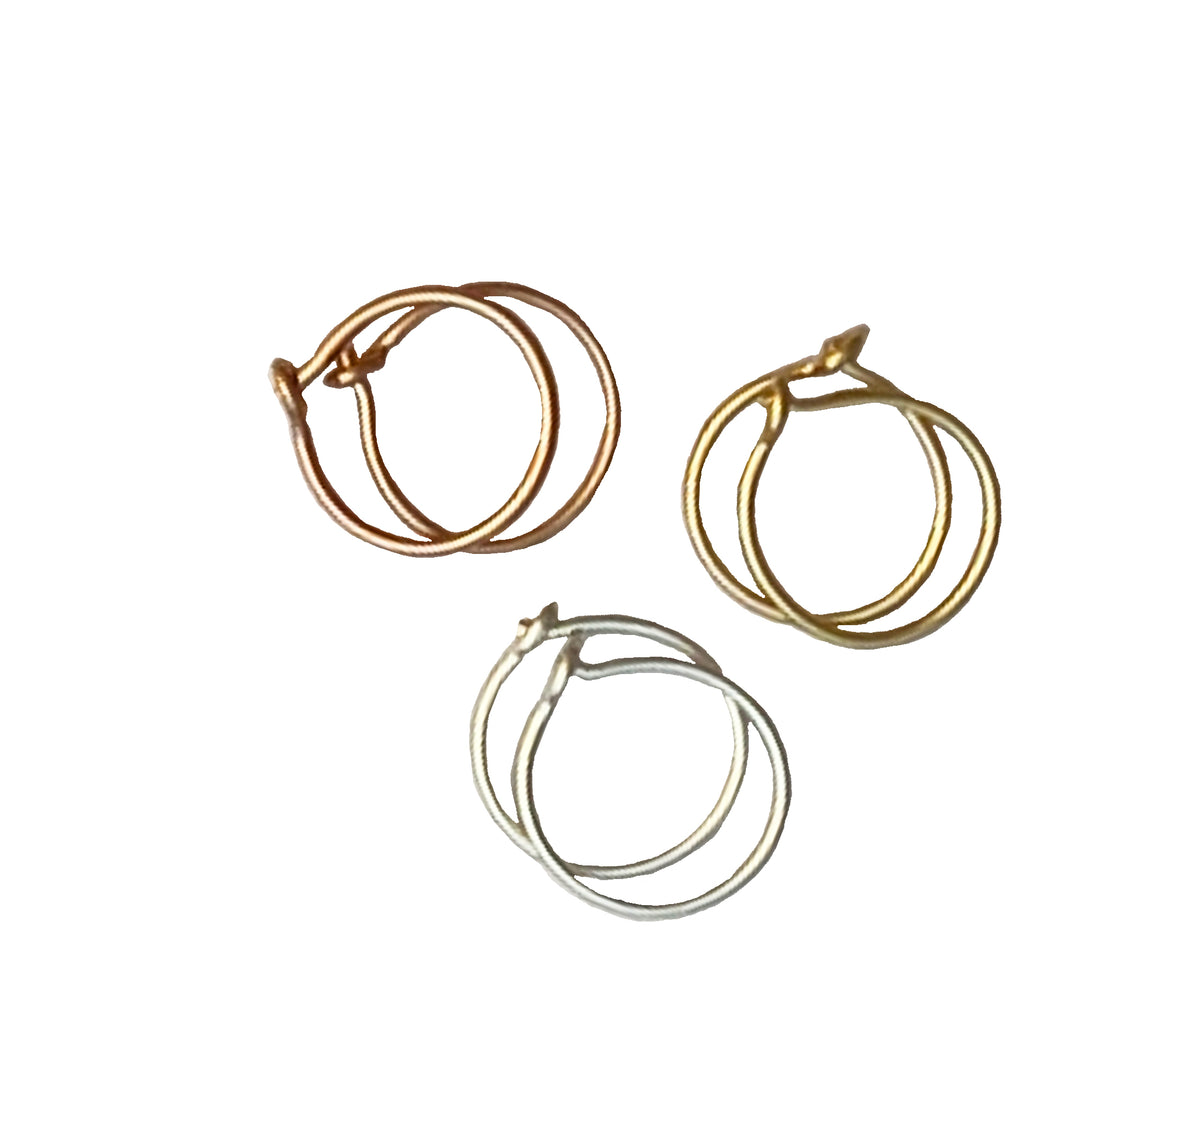 Baby Hoops in Gold fill and sterling silver